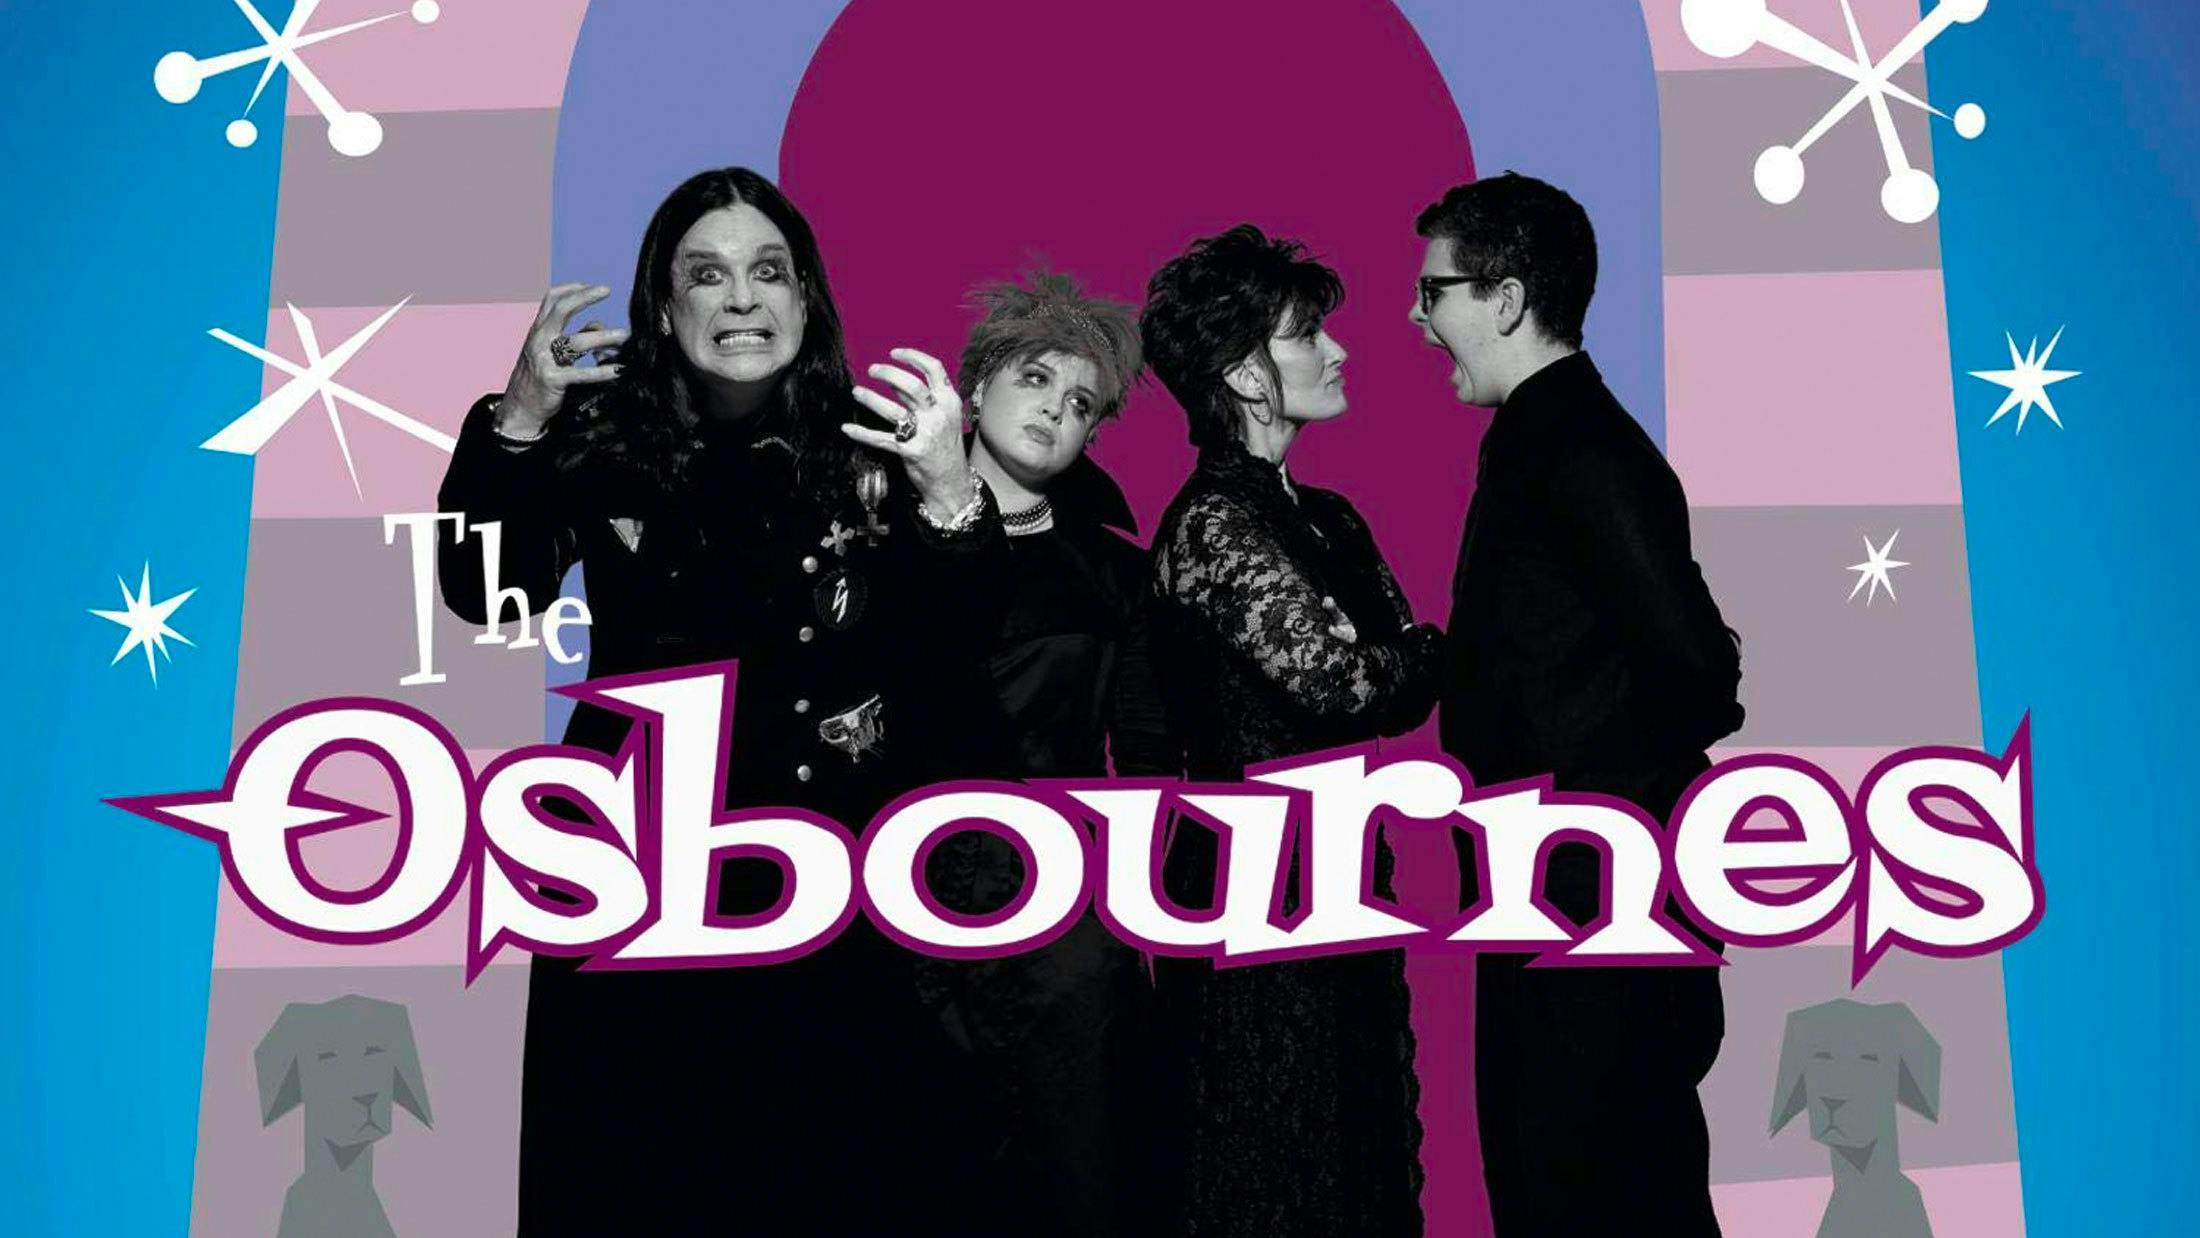 The 10 greatest moments from The Osbournes